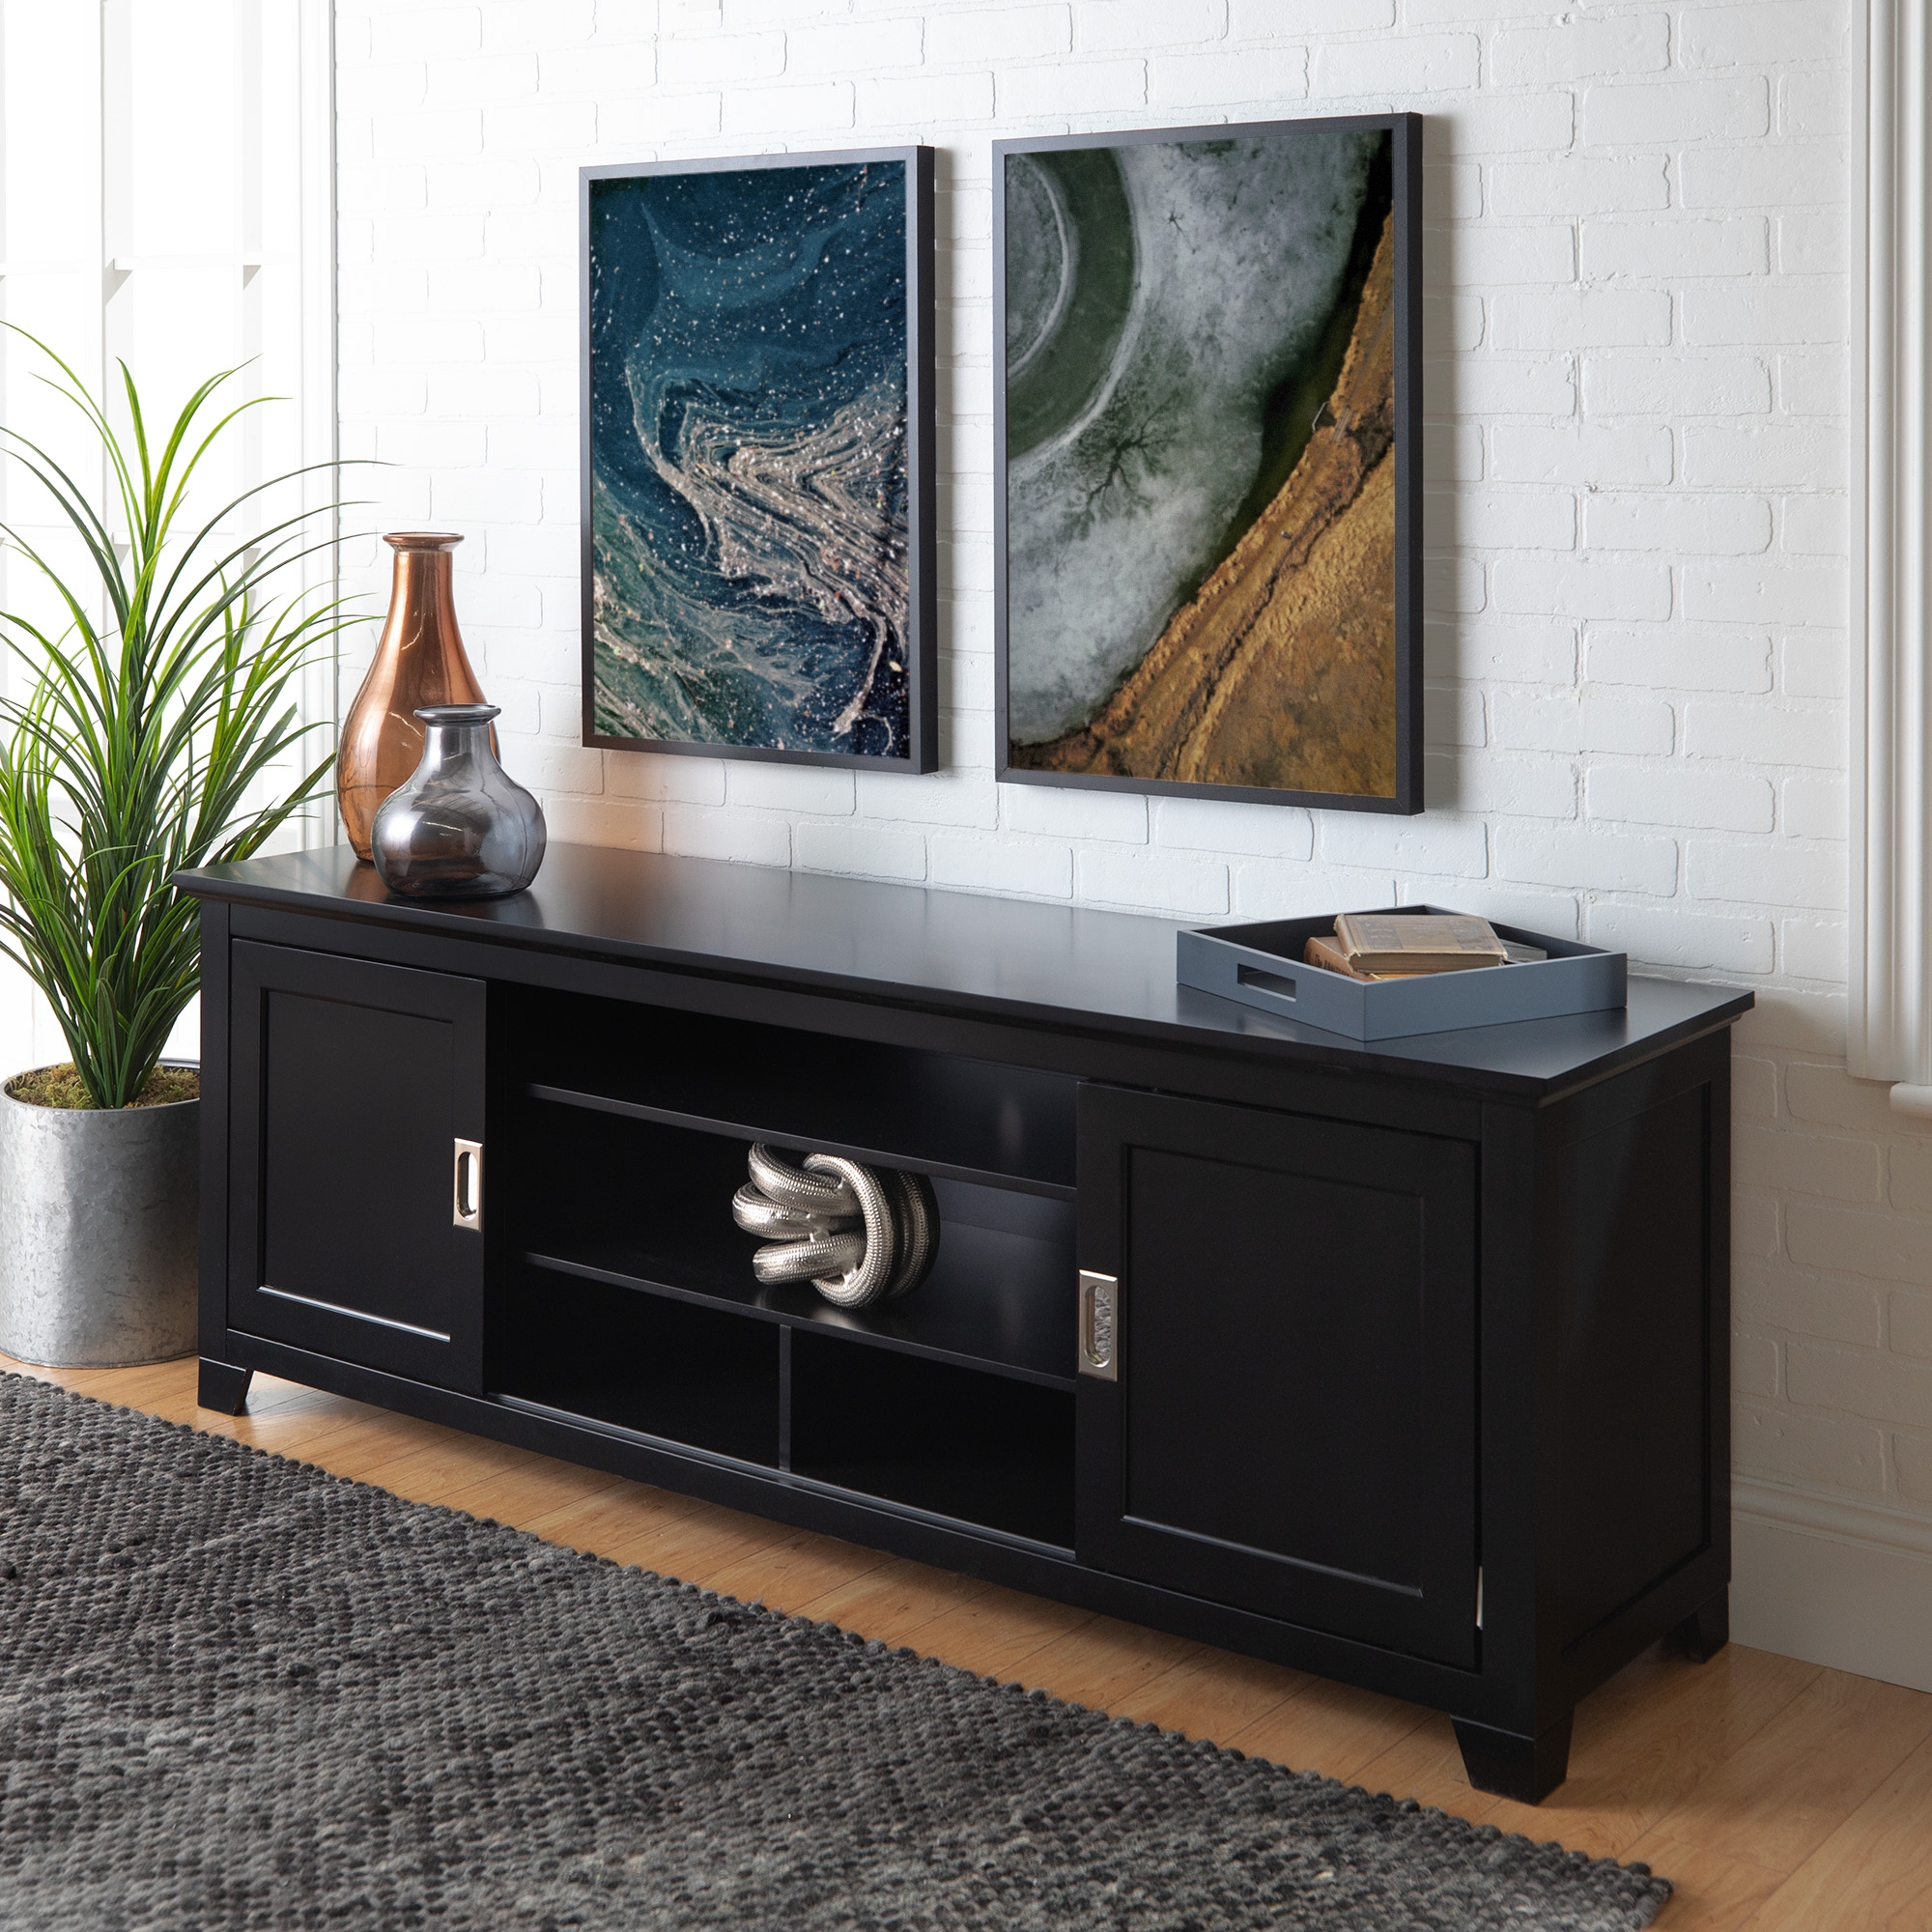 Fullview 70" Traditional Wood TV Stand - Black - Image 3